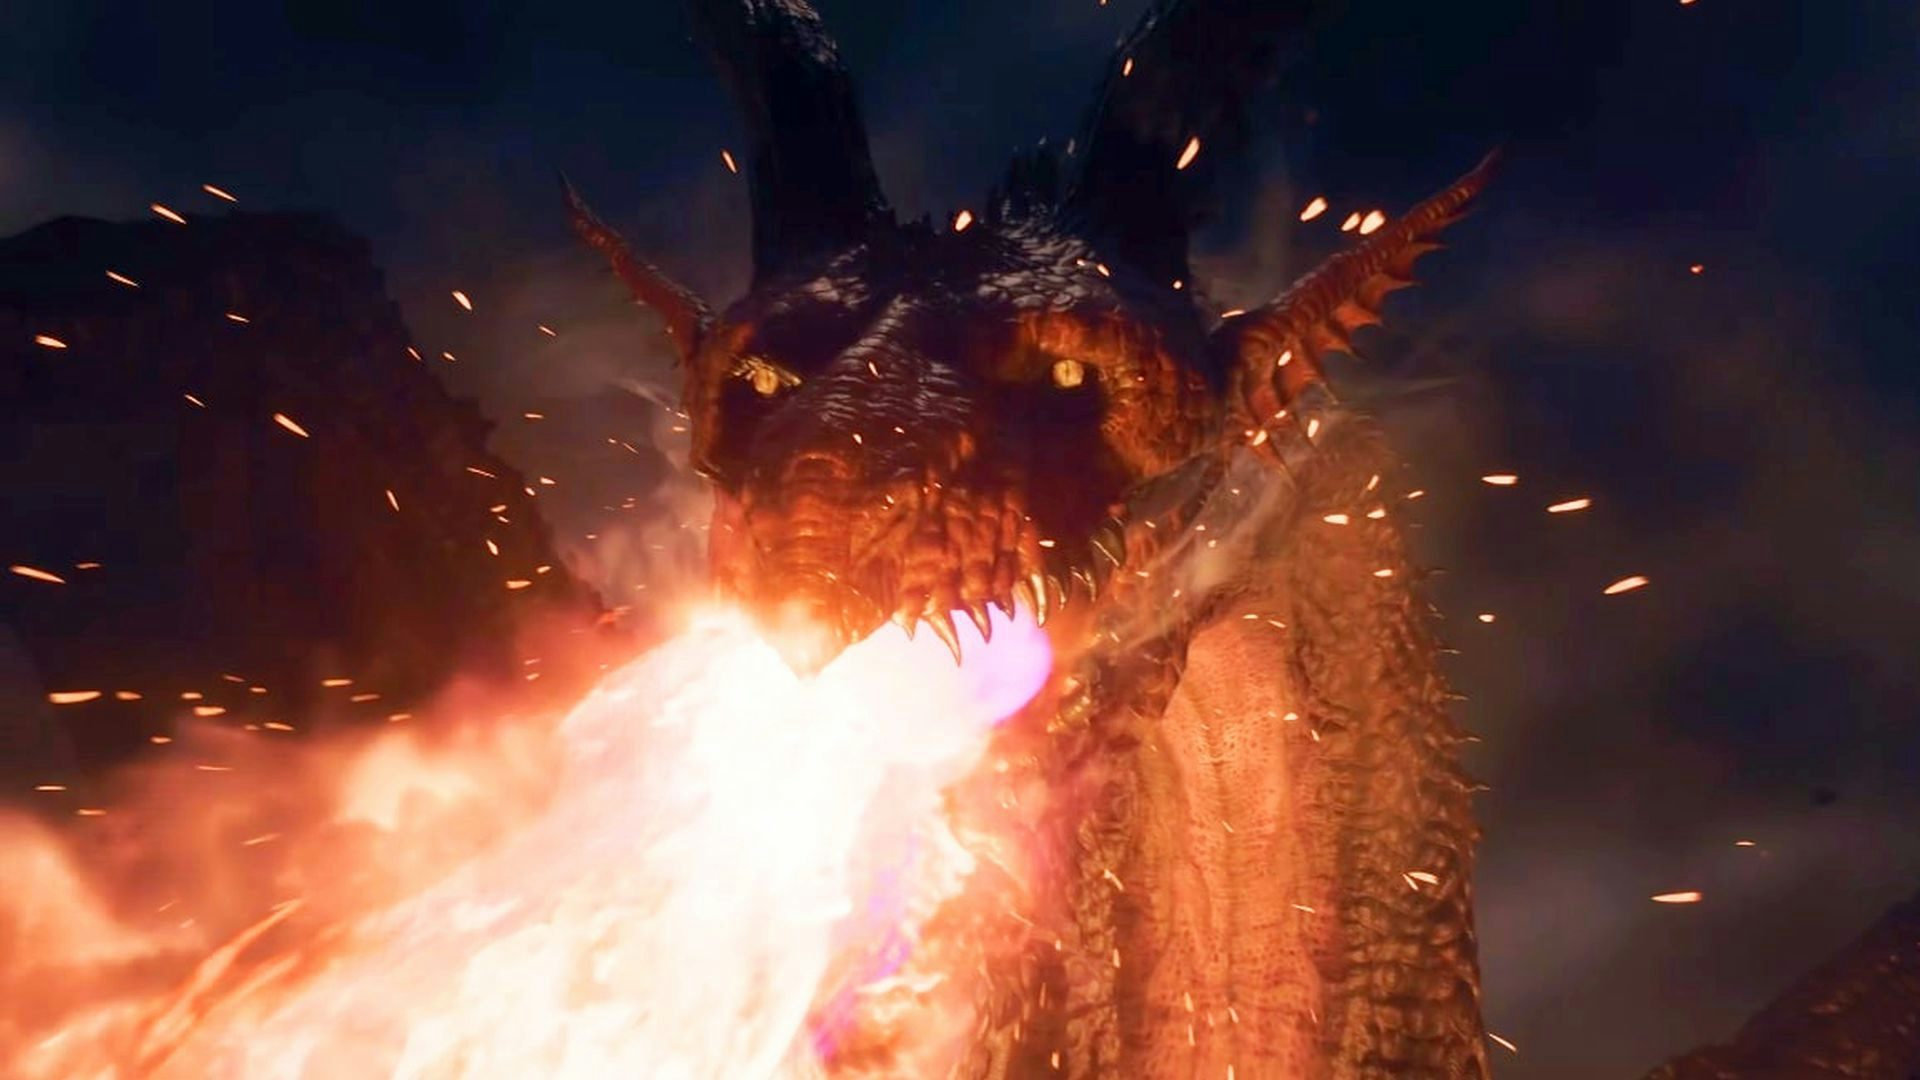 Hot takes! Tell us what you think of Dragon's Dogma 2 so far for $1